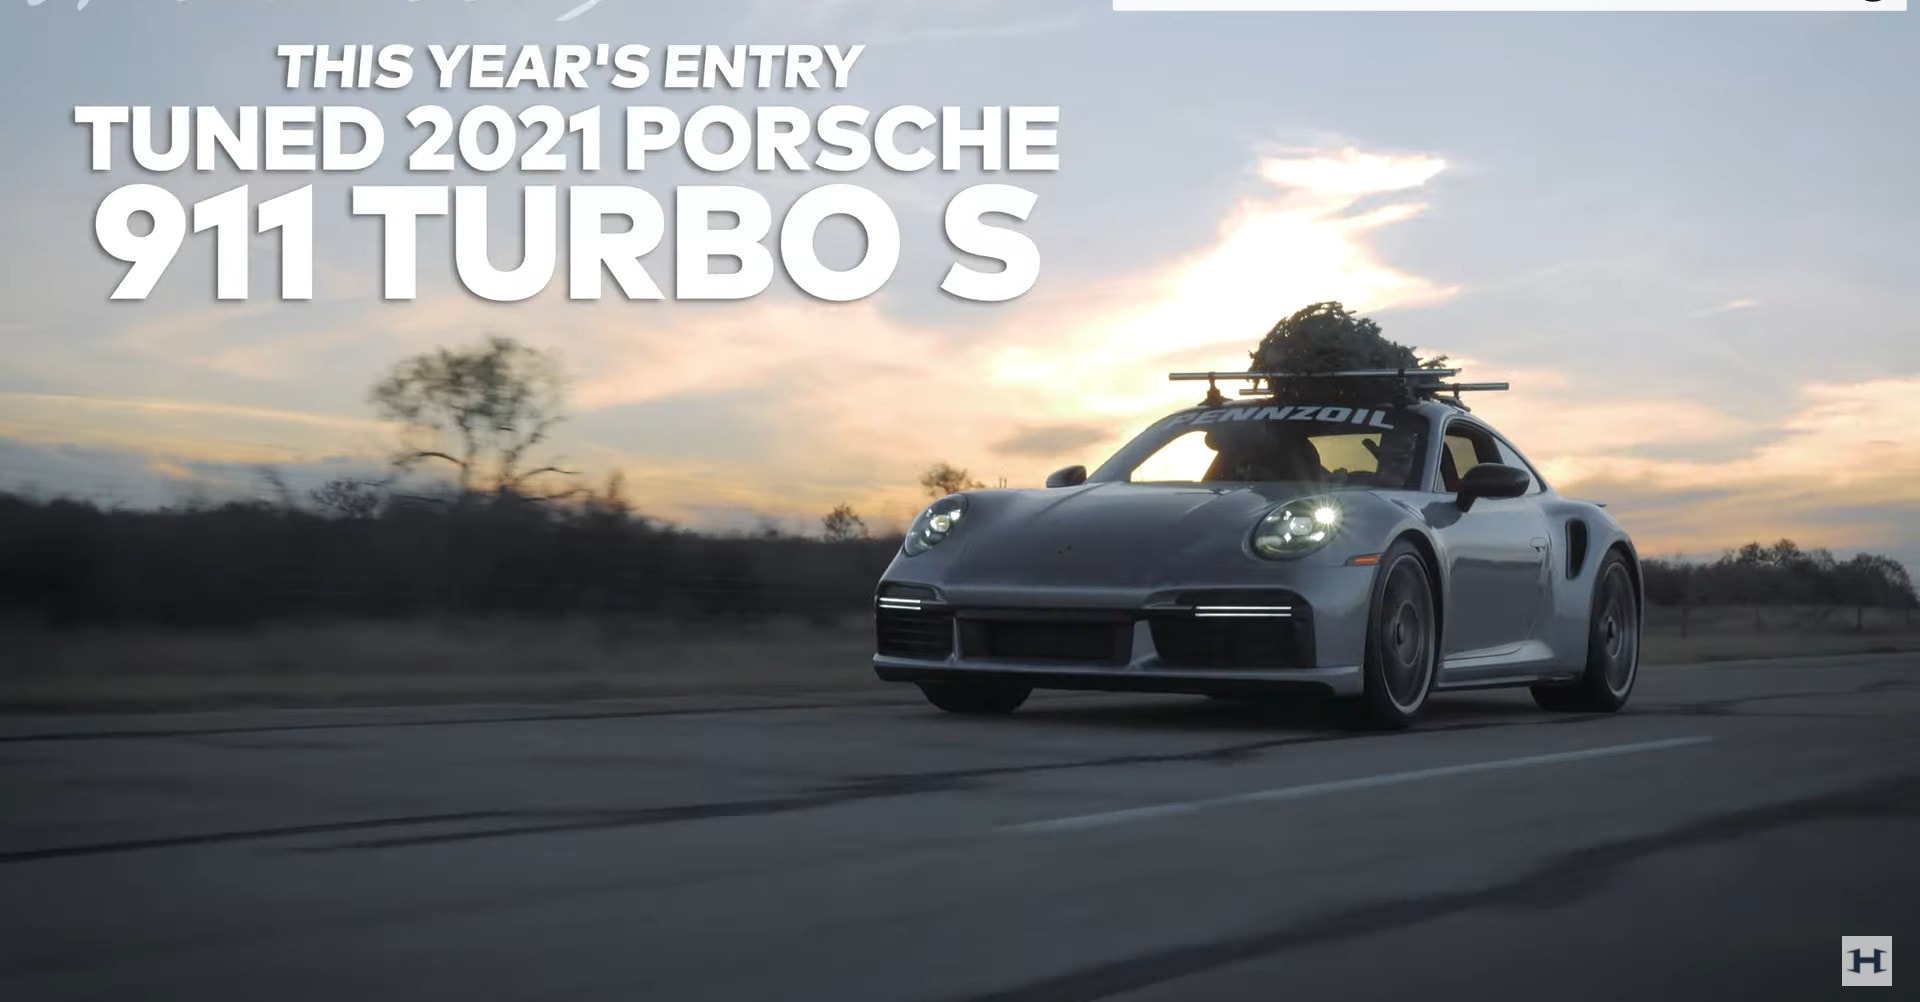 750-HP Porsche 911 Turbo S Becomes 2021's Fastest Christmas Tree Delivery  Car - autoevolution